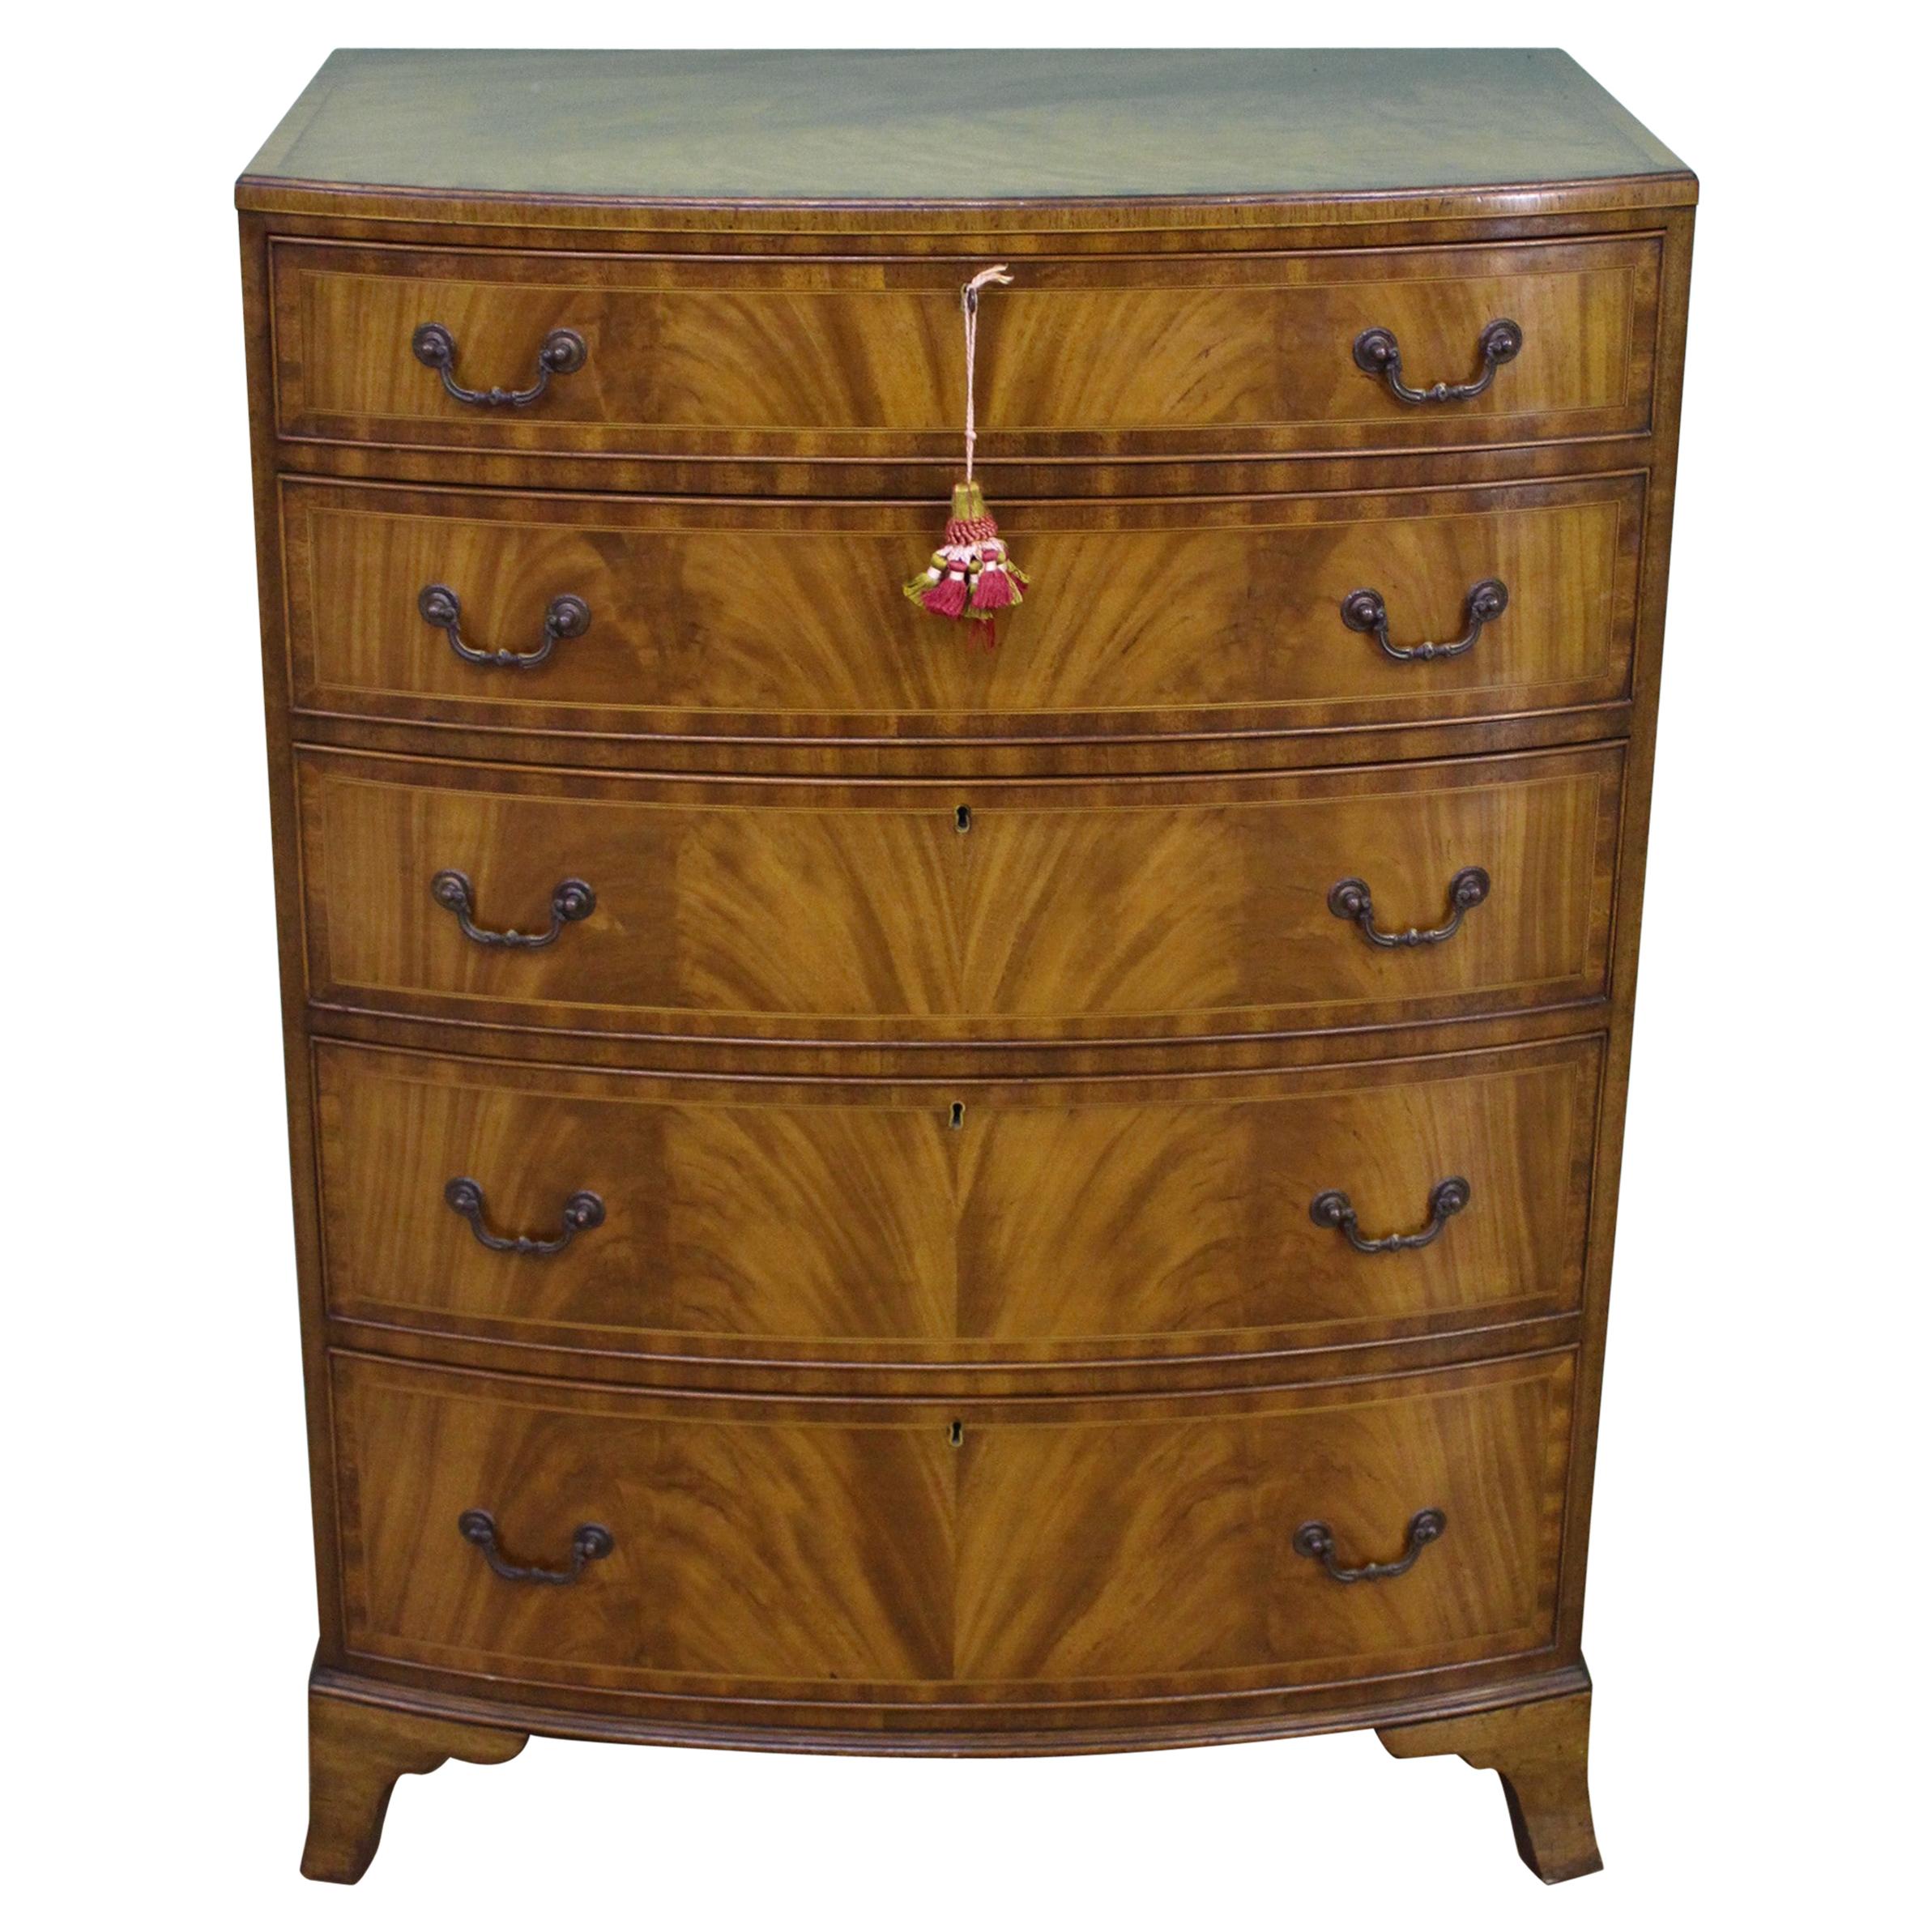 Waring and Gillow Inlaid Mahogany Bow Fronted Chest of Drawers